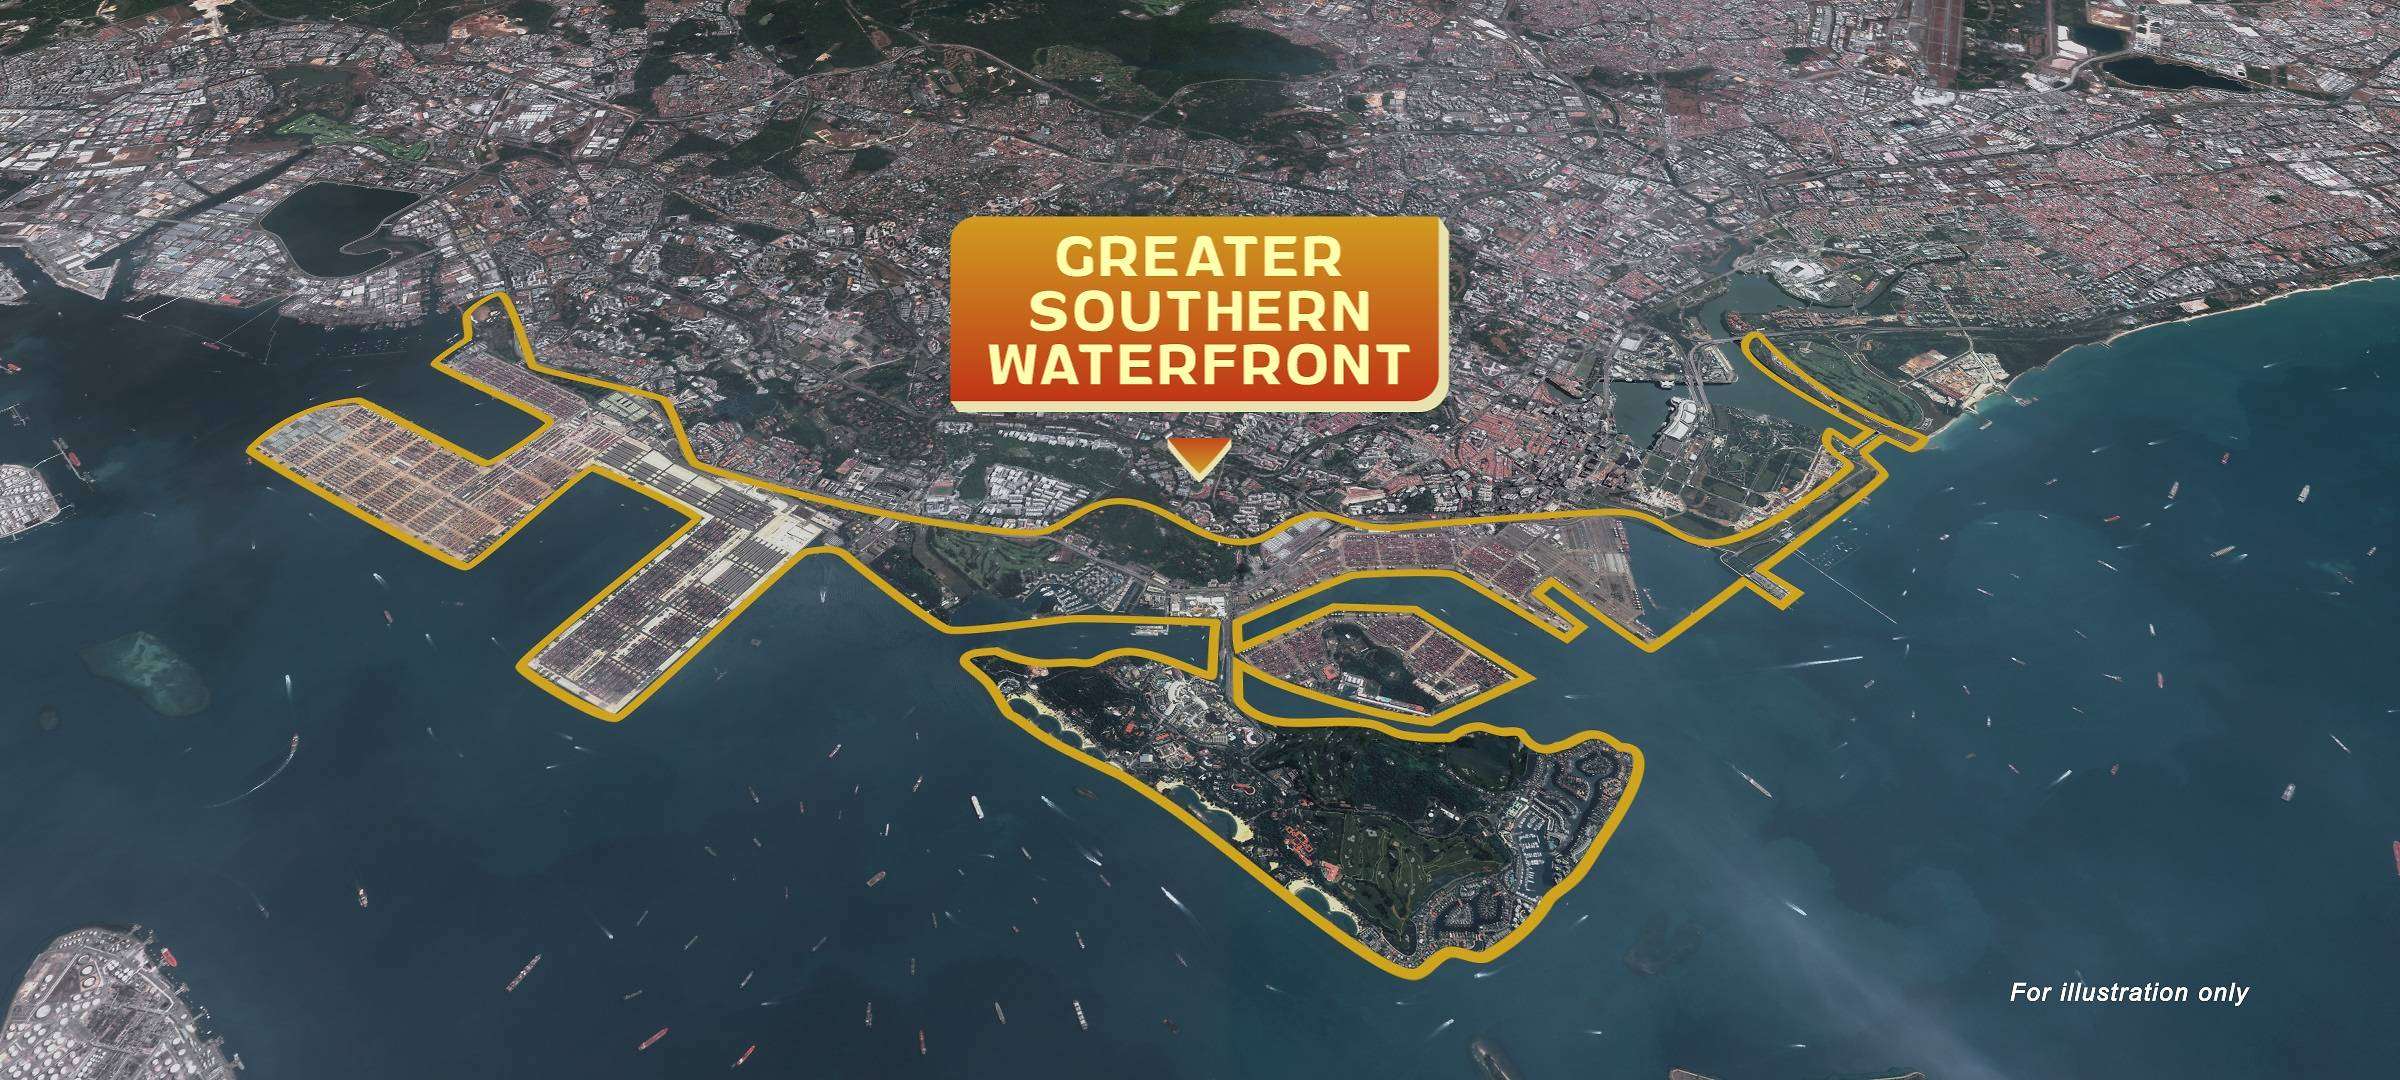 New attractions, housing and office spaces to be developed in Greater Southern Waterfront